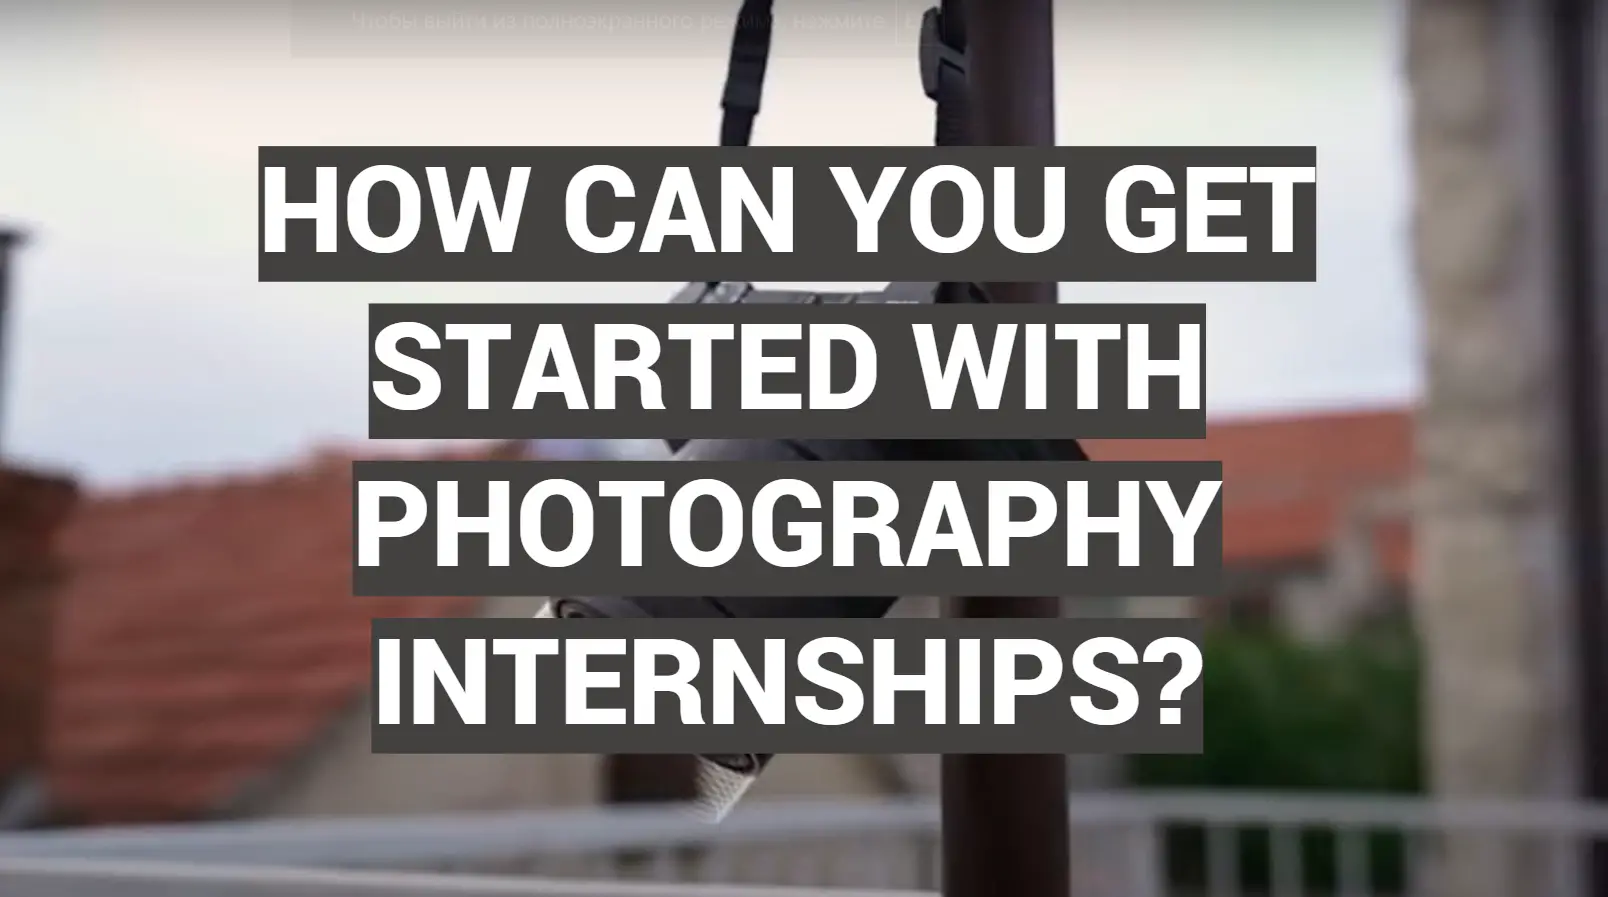 How Can You Get Started With Photography Internships?